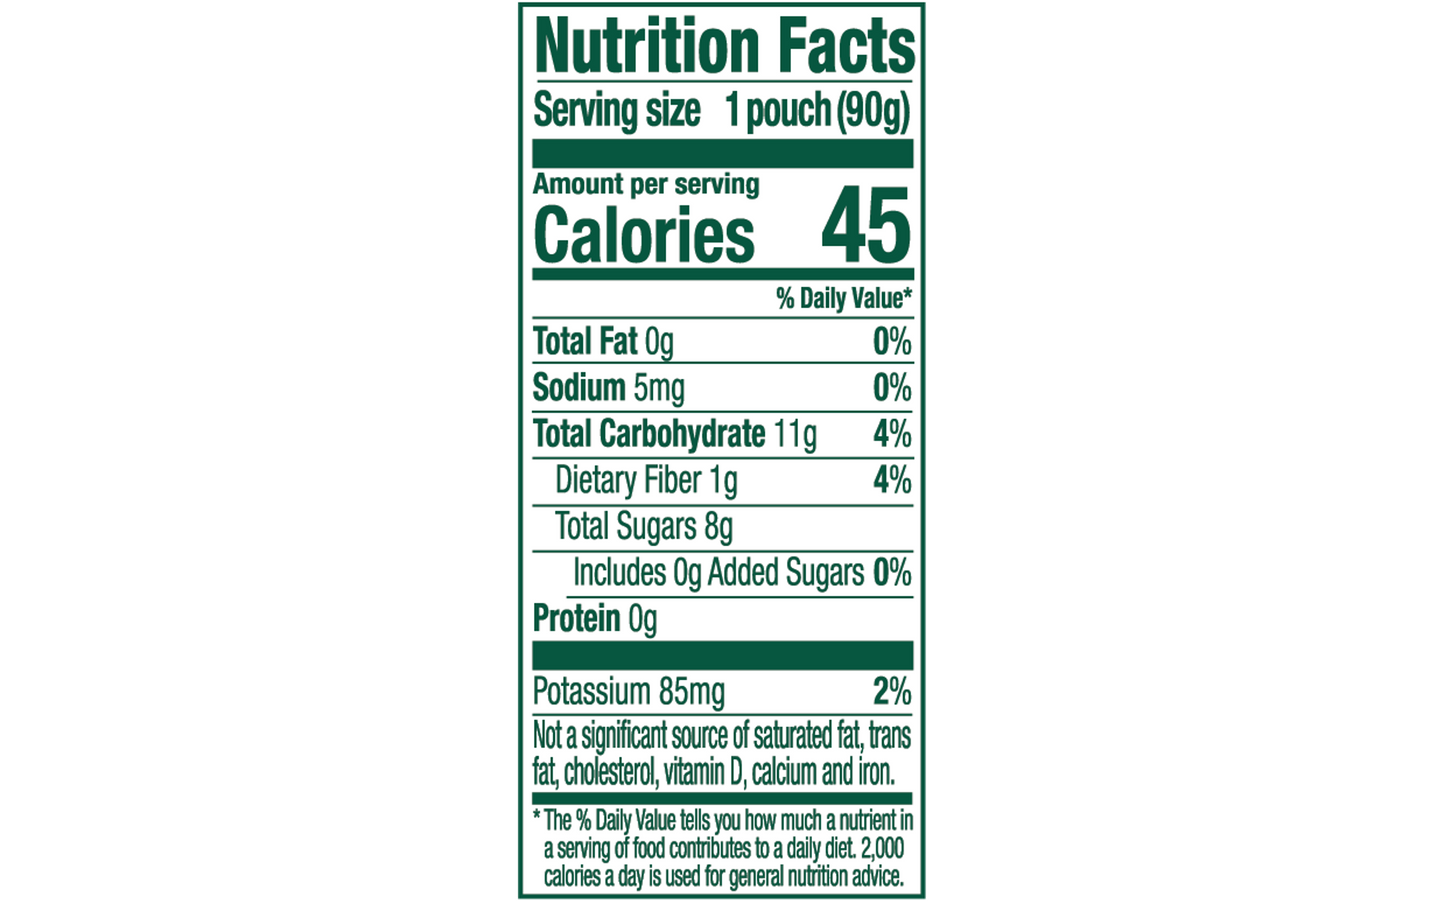 Nutrition facts for Buddy Fruits Peach, Carrot & Apple fruit & veggies pouch.